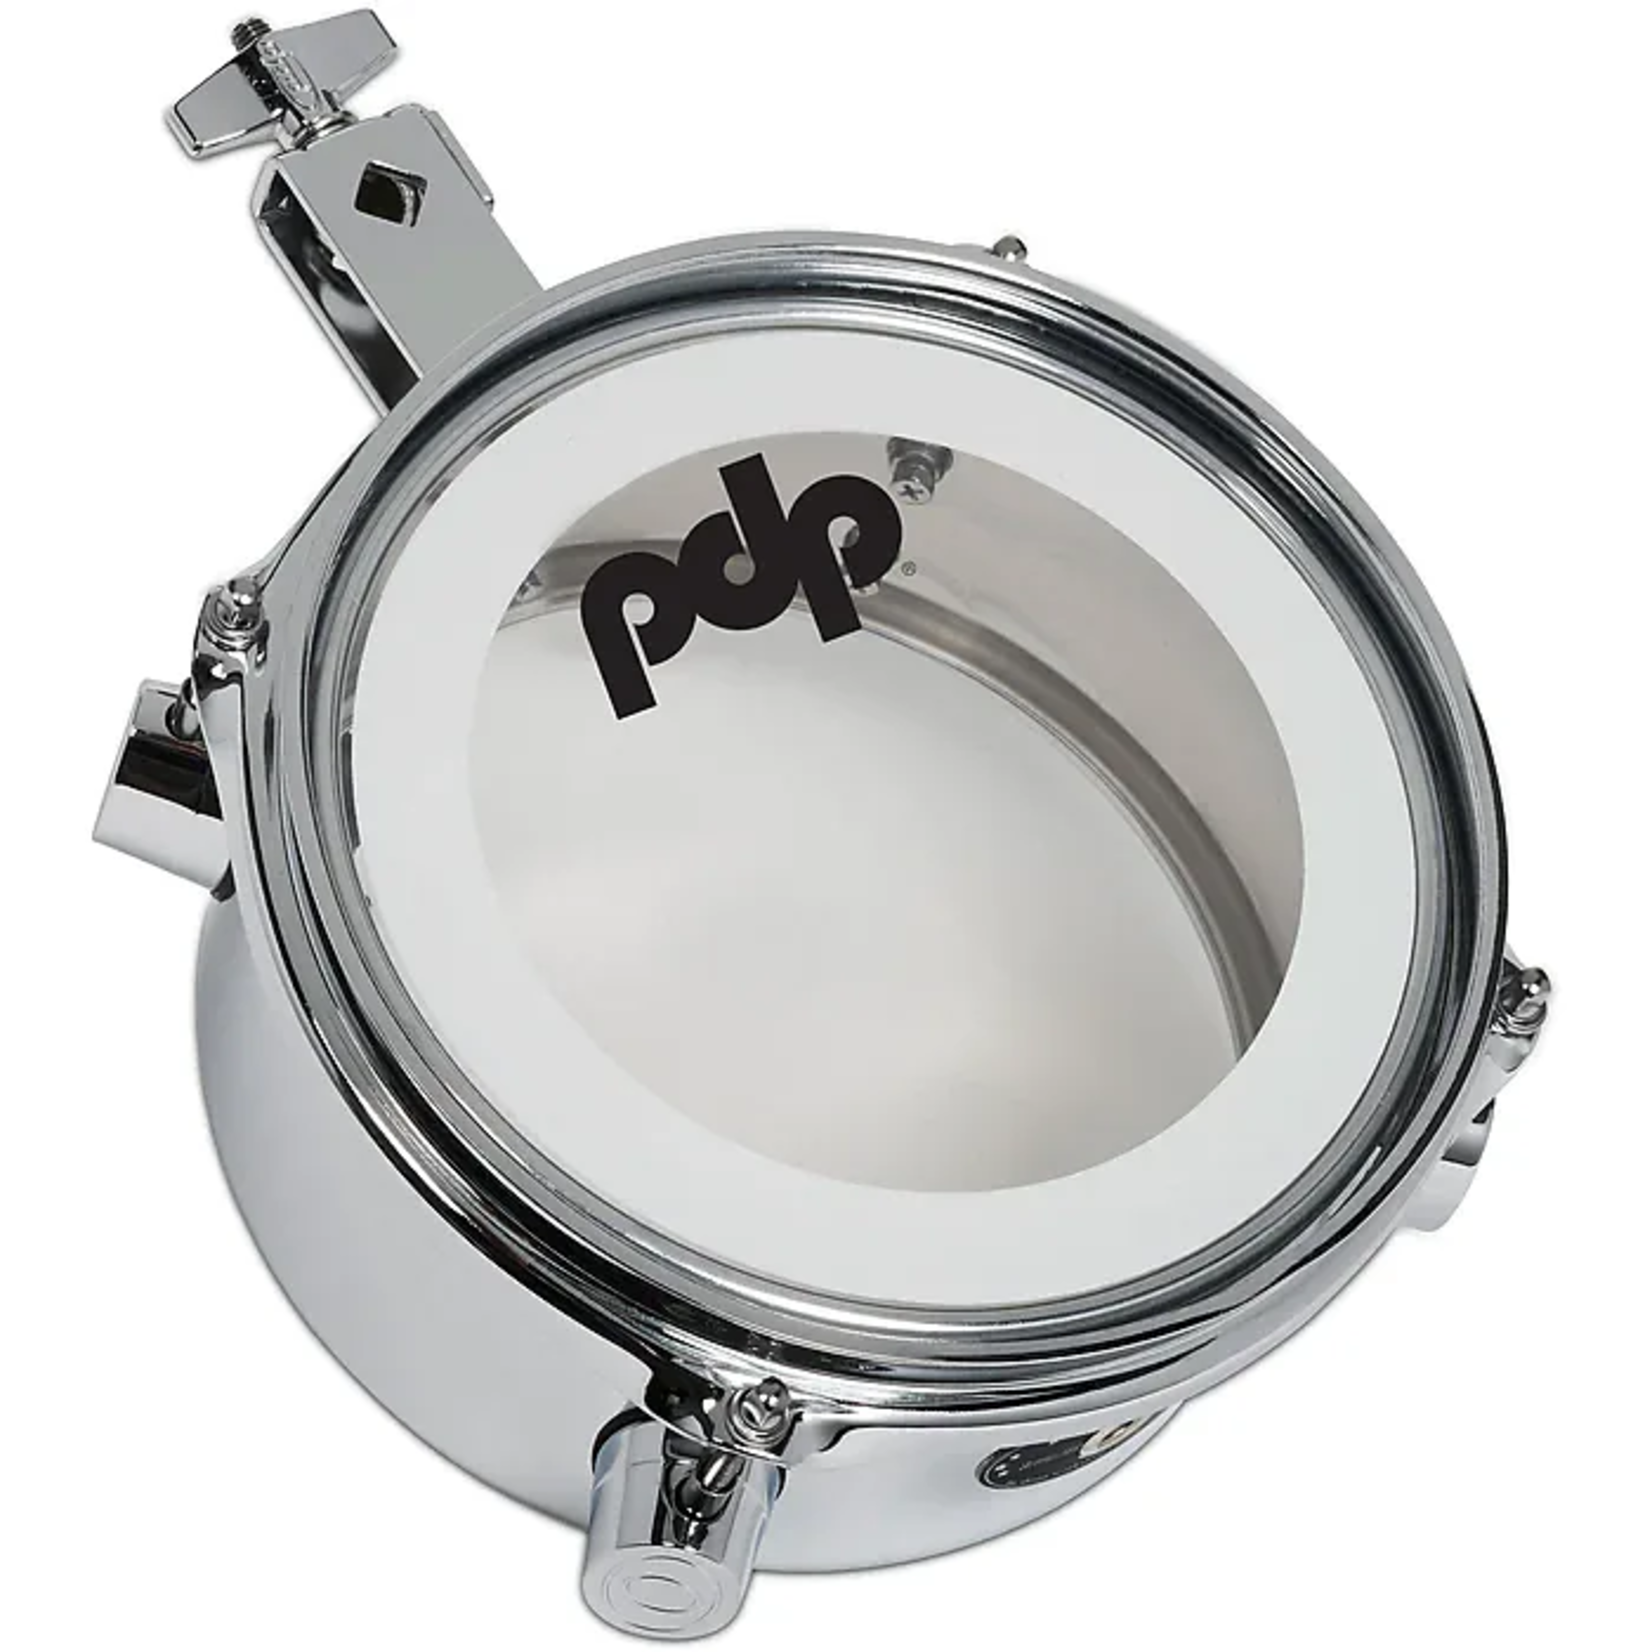 PDP PDP 4x8" Mini Timbale, Chrome Over Steel, Fits 10.5mm L-Arm PDMT48